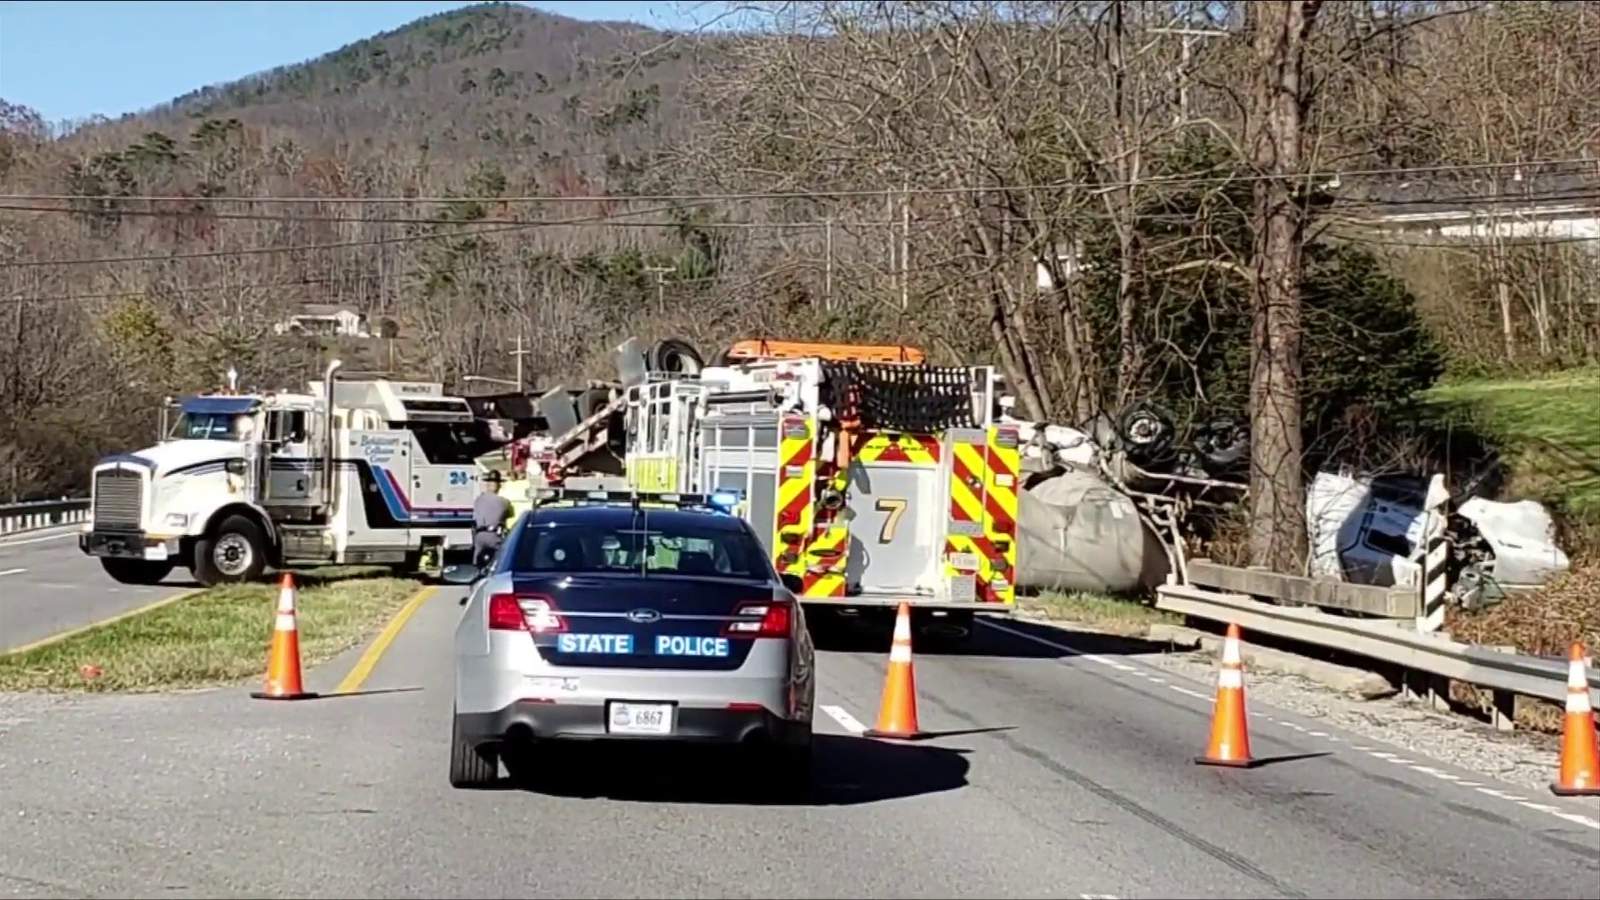 Tractor-trailer crash raises questions about safety on Route 220